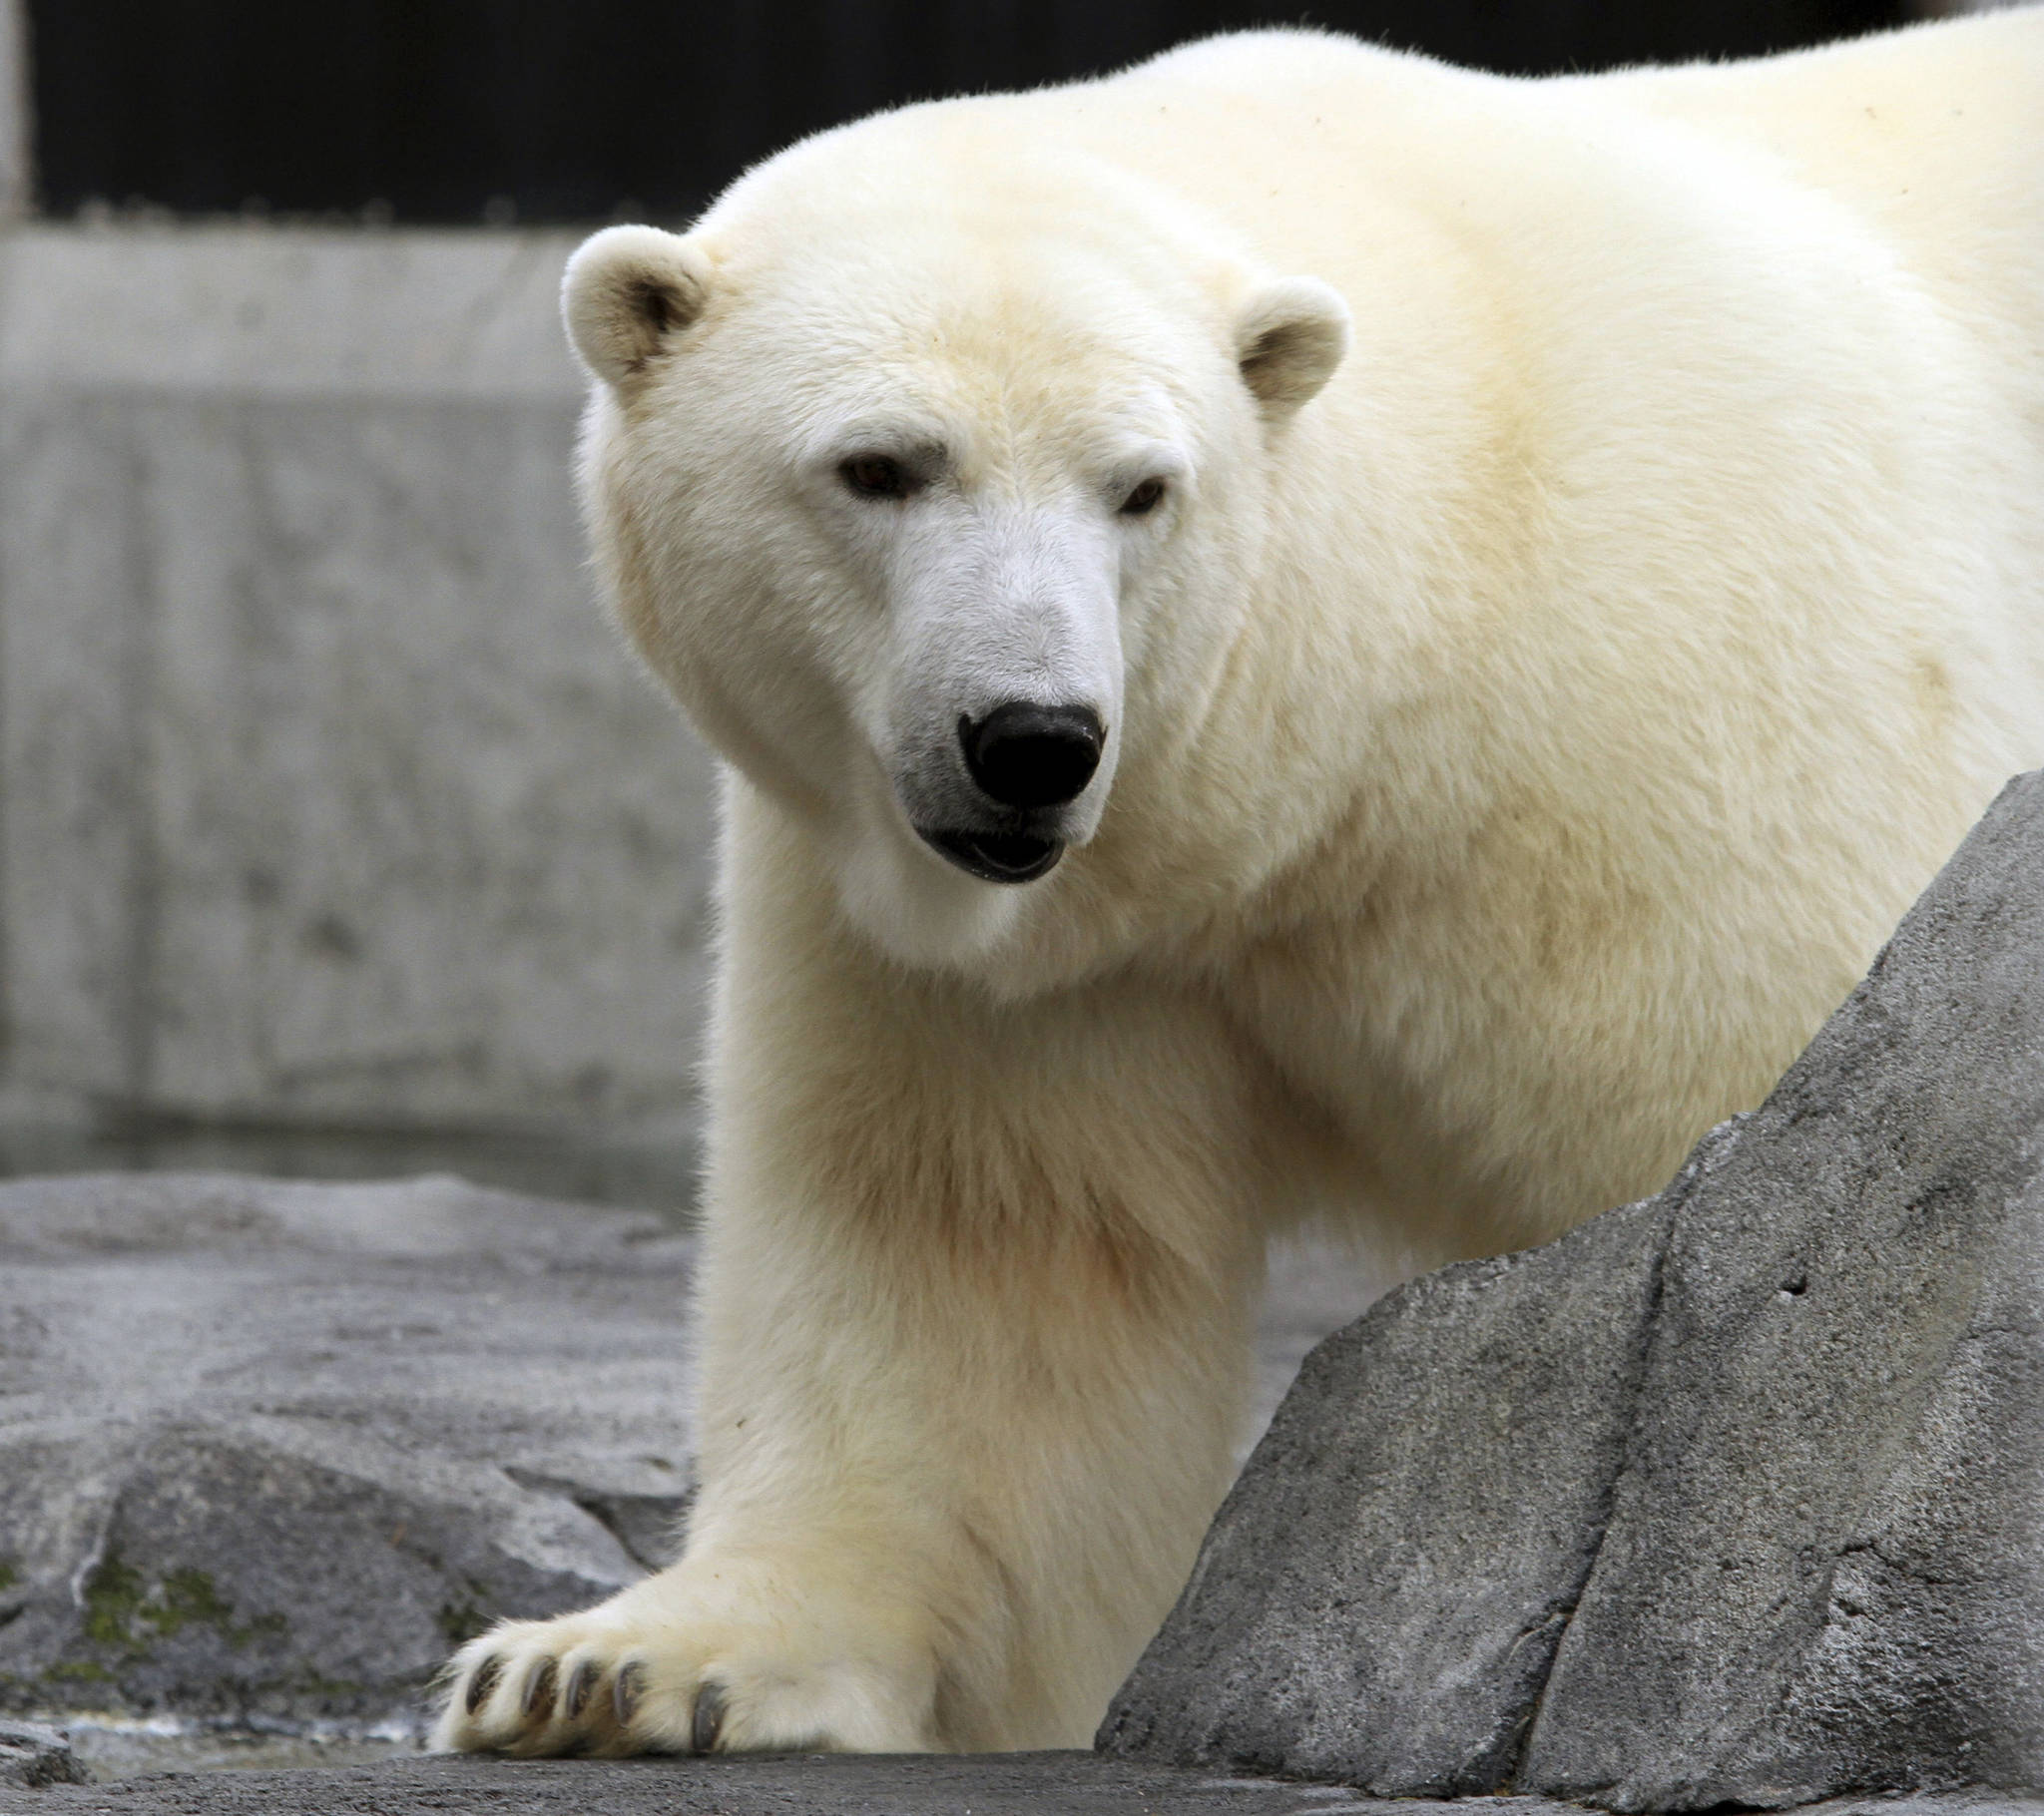 In this Sept. 5, 2012 photo, Ahpun, a female polar bear, strolls around her cage at the Alaska Zoo in Anchorage, Alaska. The popular polar bear died unexpectedly on New Year’s Eve the zoo said Tuesday, Jan. 2, 2018. (Dan Joling | The Associated Press File)